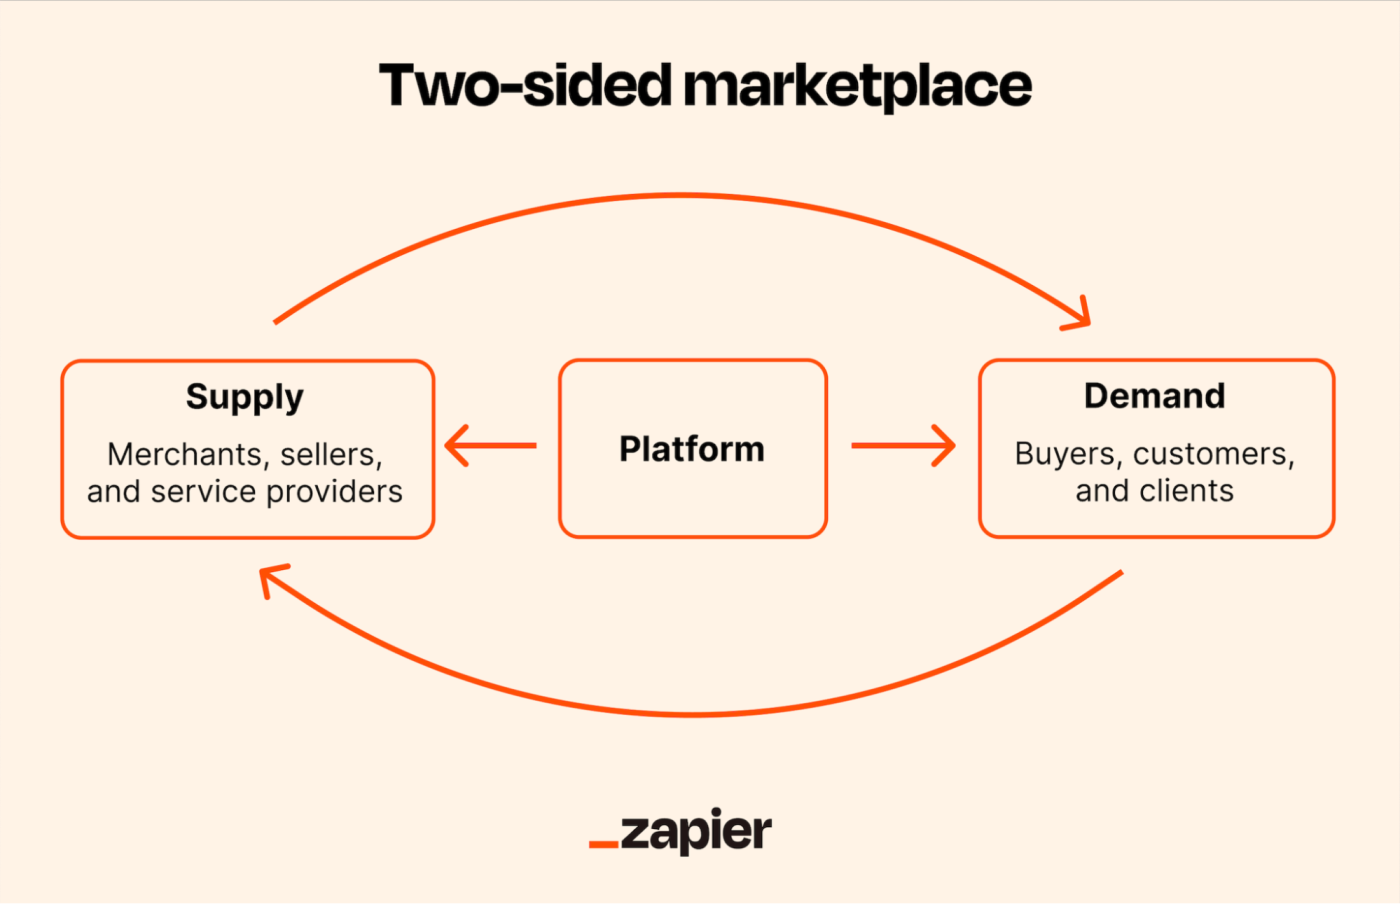 An infographic representing a two-sided marketplace